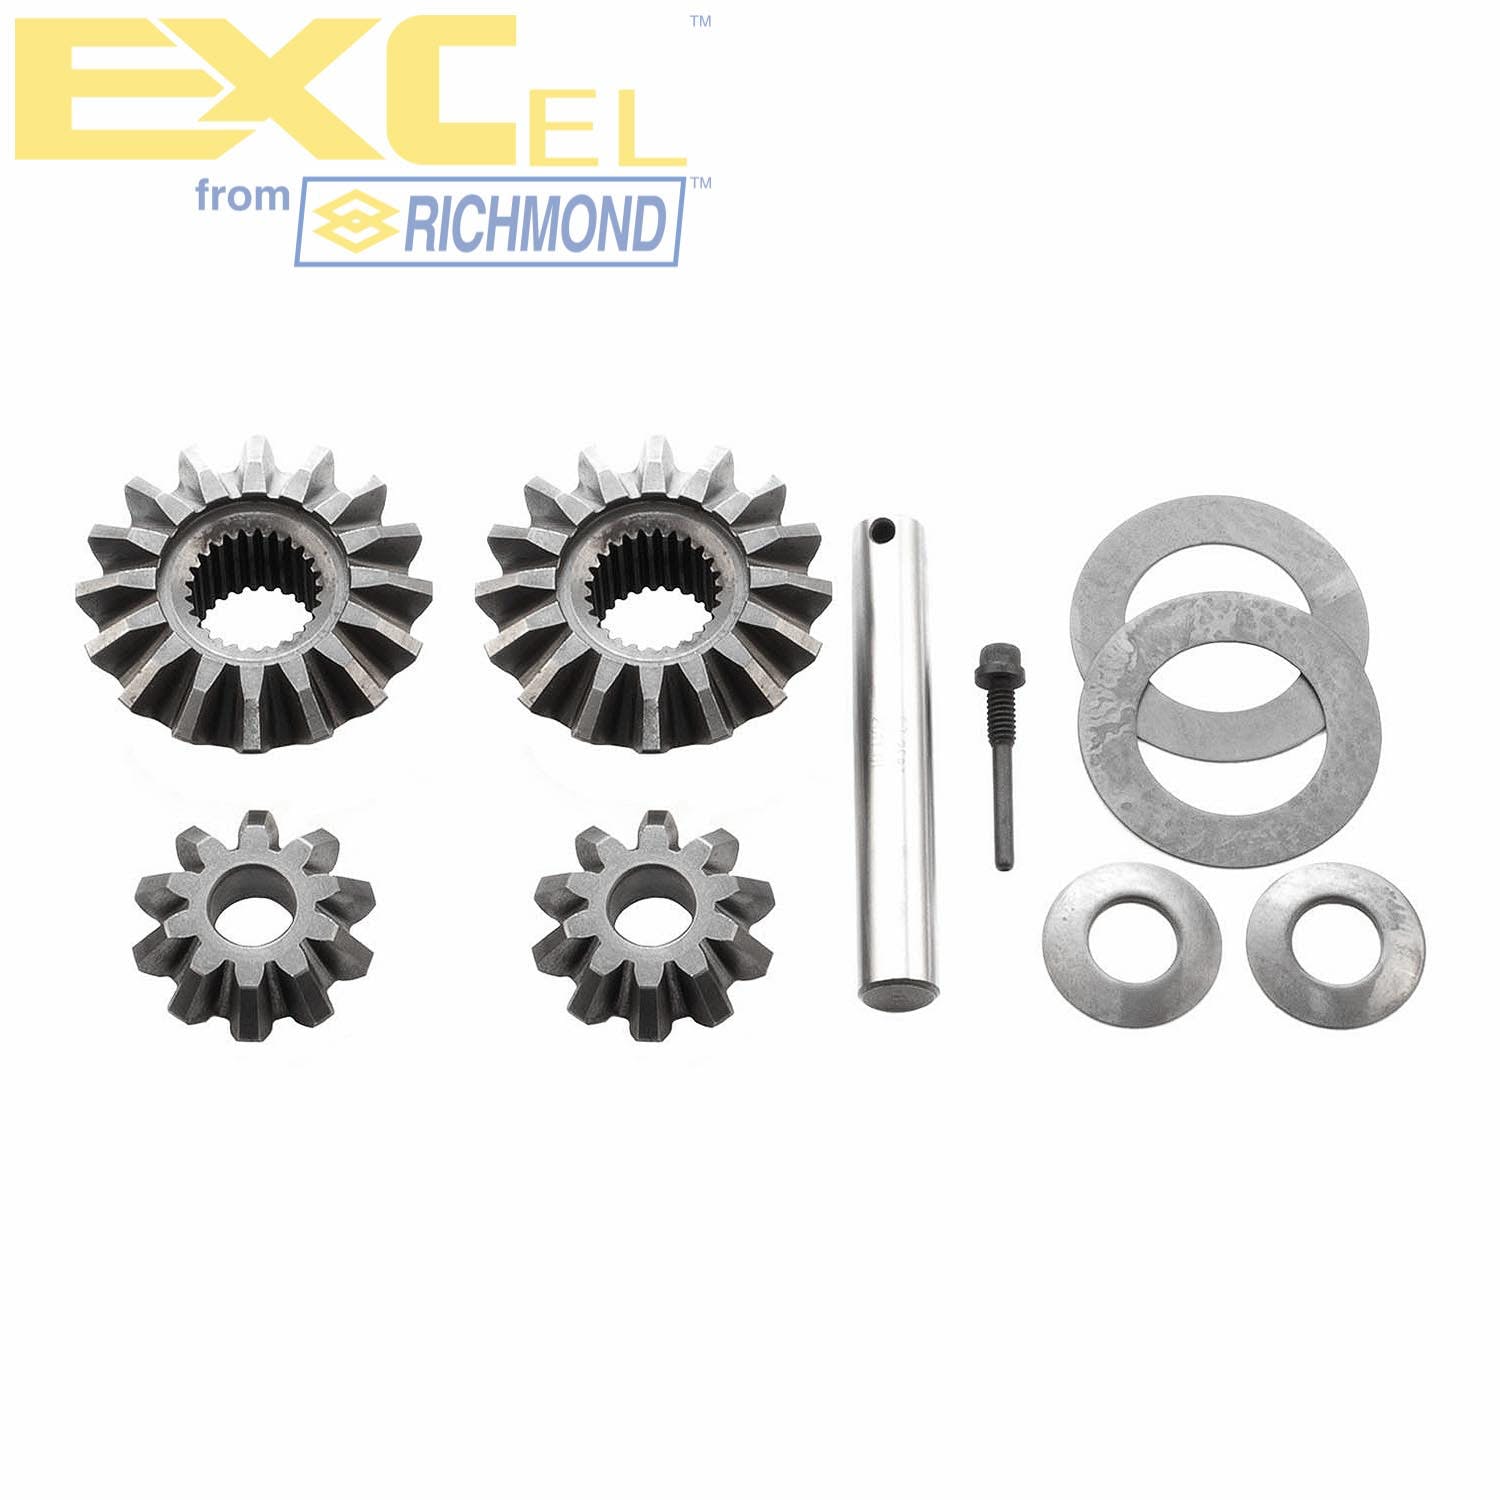 Excel XL-4000 Differential Carrier Gear Kit